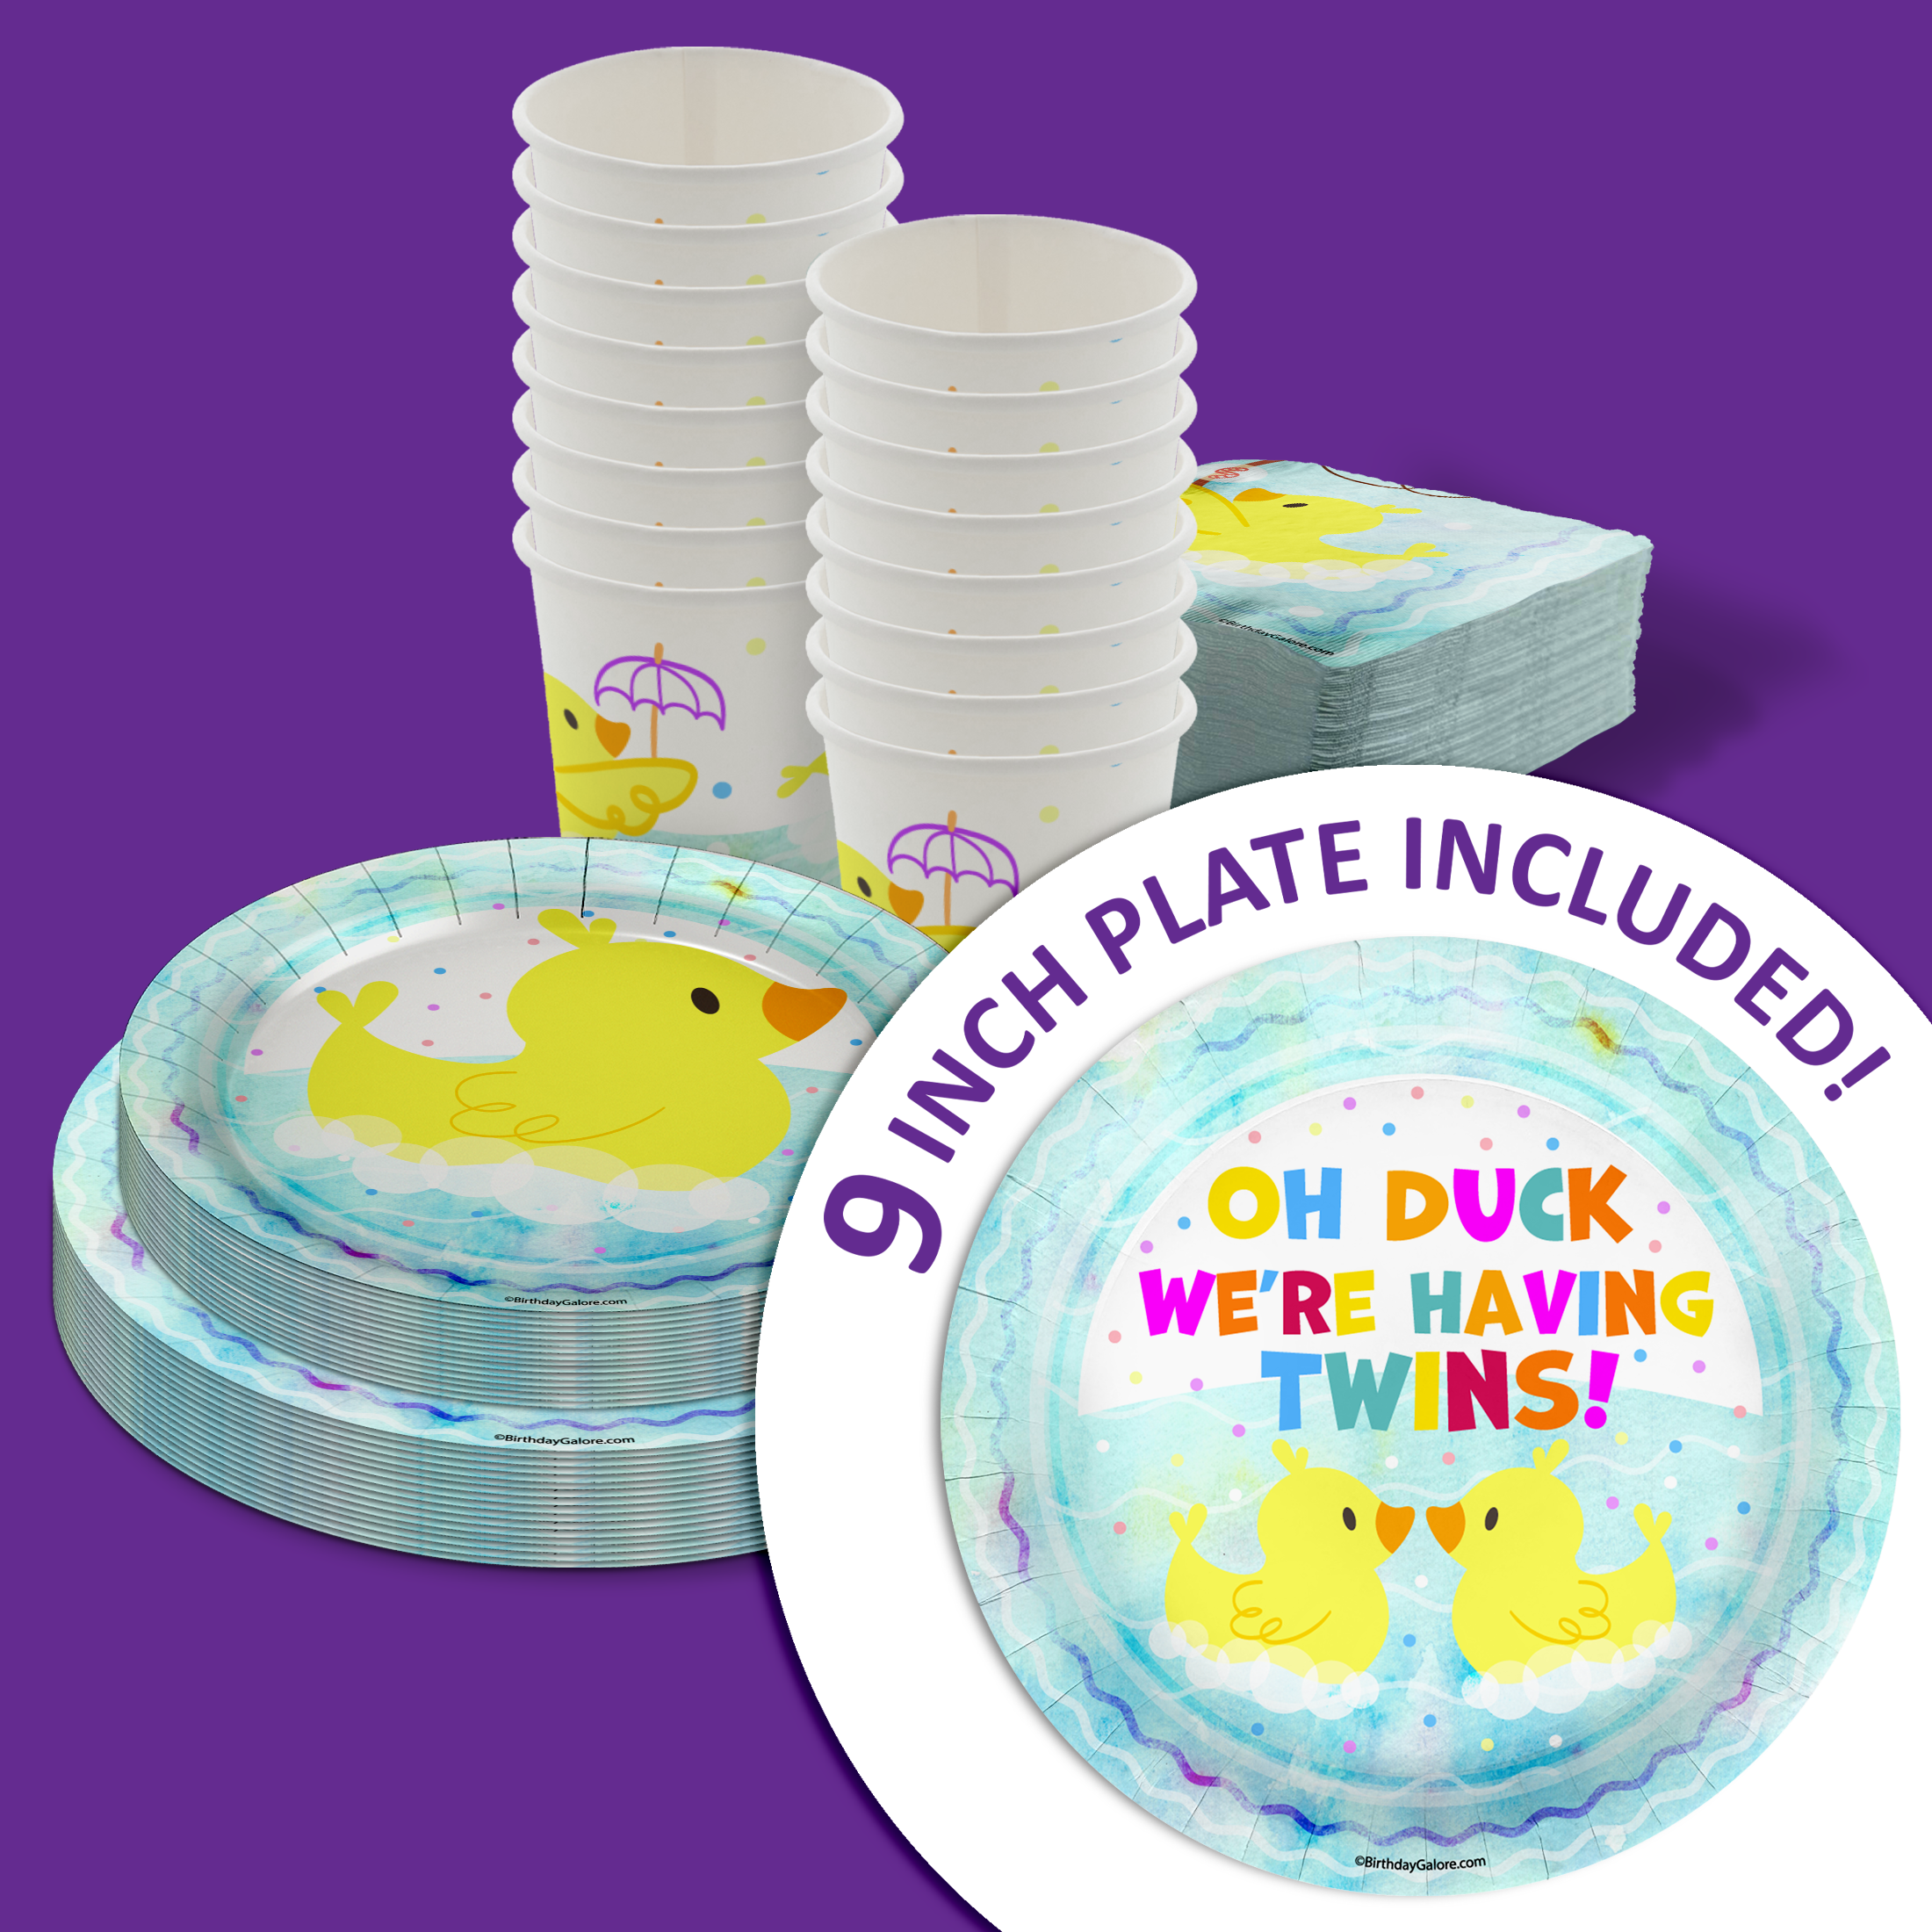 Oh Duck! We're Having Twins Baby Shower Party Supplies 64 Piece Tableware Set Includes Large 9" Paper Plates Dessert Plates, Cups and Napkins Kit for 16